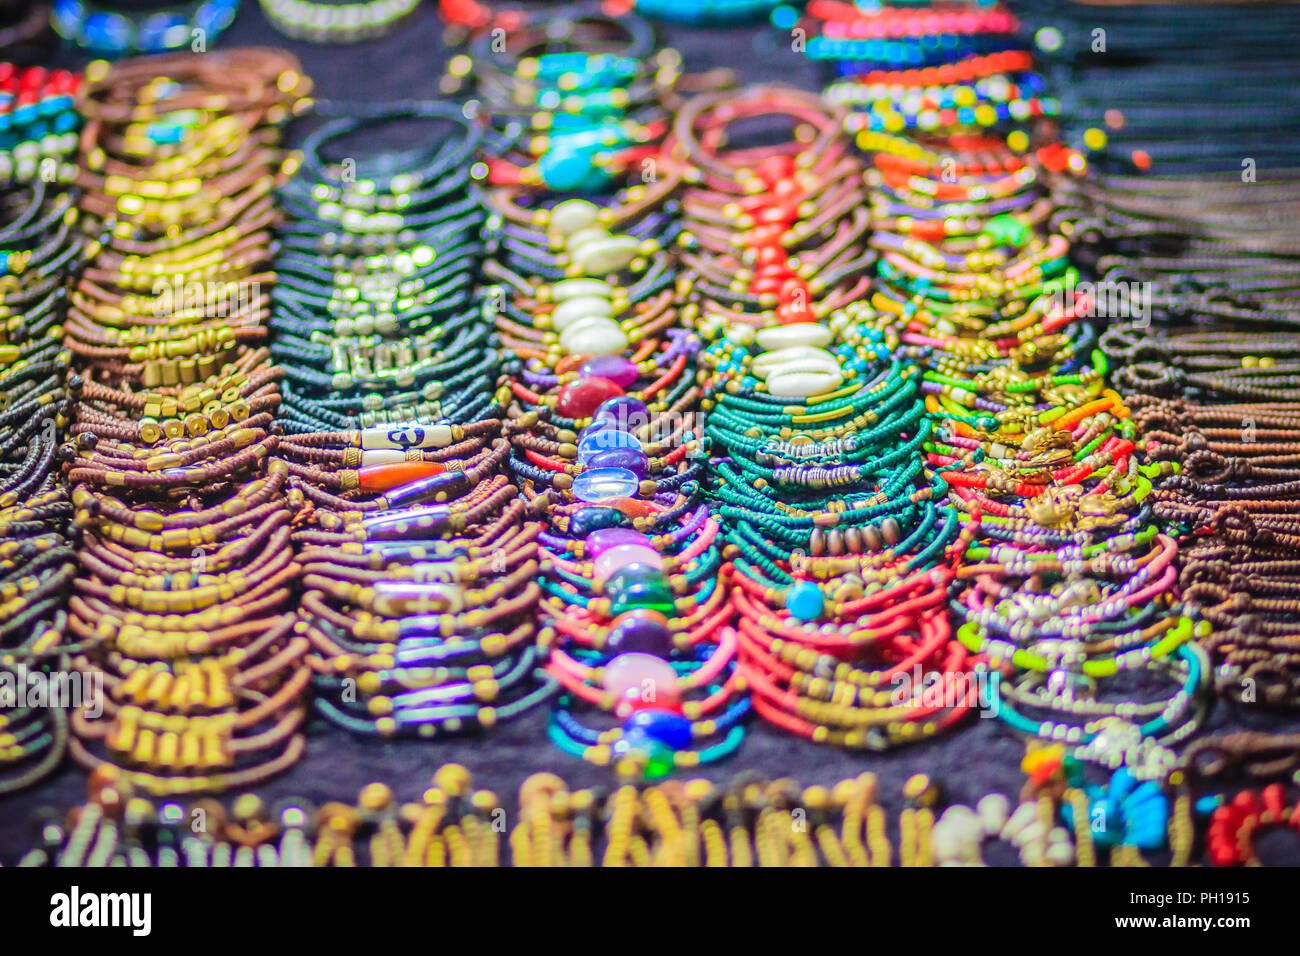 Colorful bracelets, beads and necklaces souvenir for sale on street at Khao  San Road night market, Bangkok, Thailand Stock Photo - Alamy